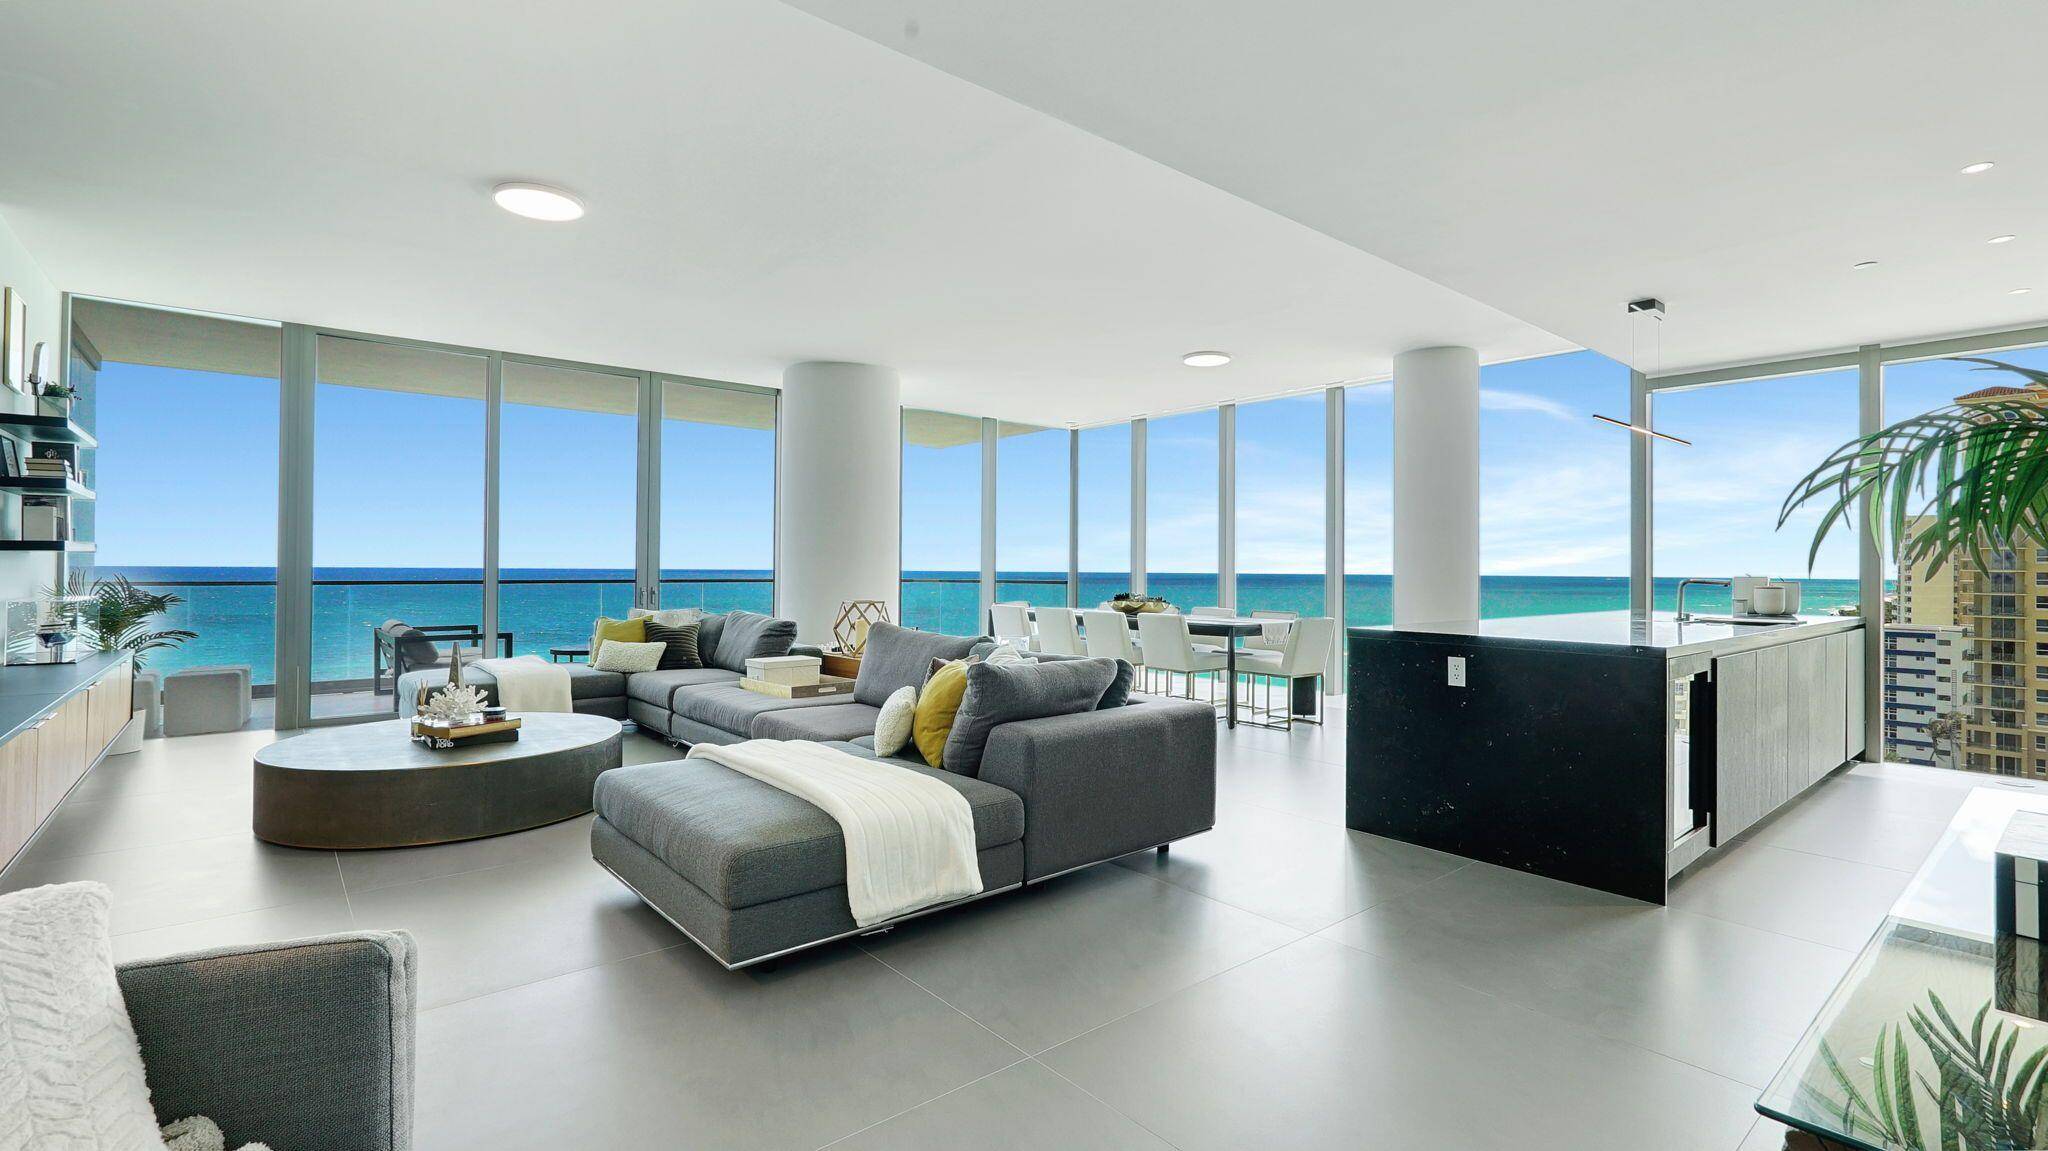 Experience unparalleled luxury at 2000 Ocean.